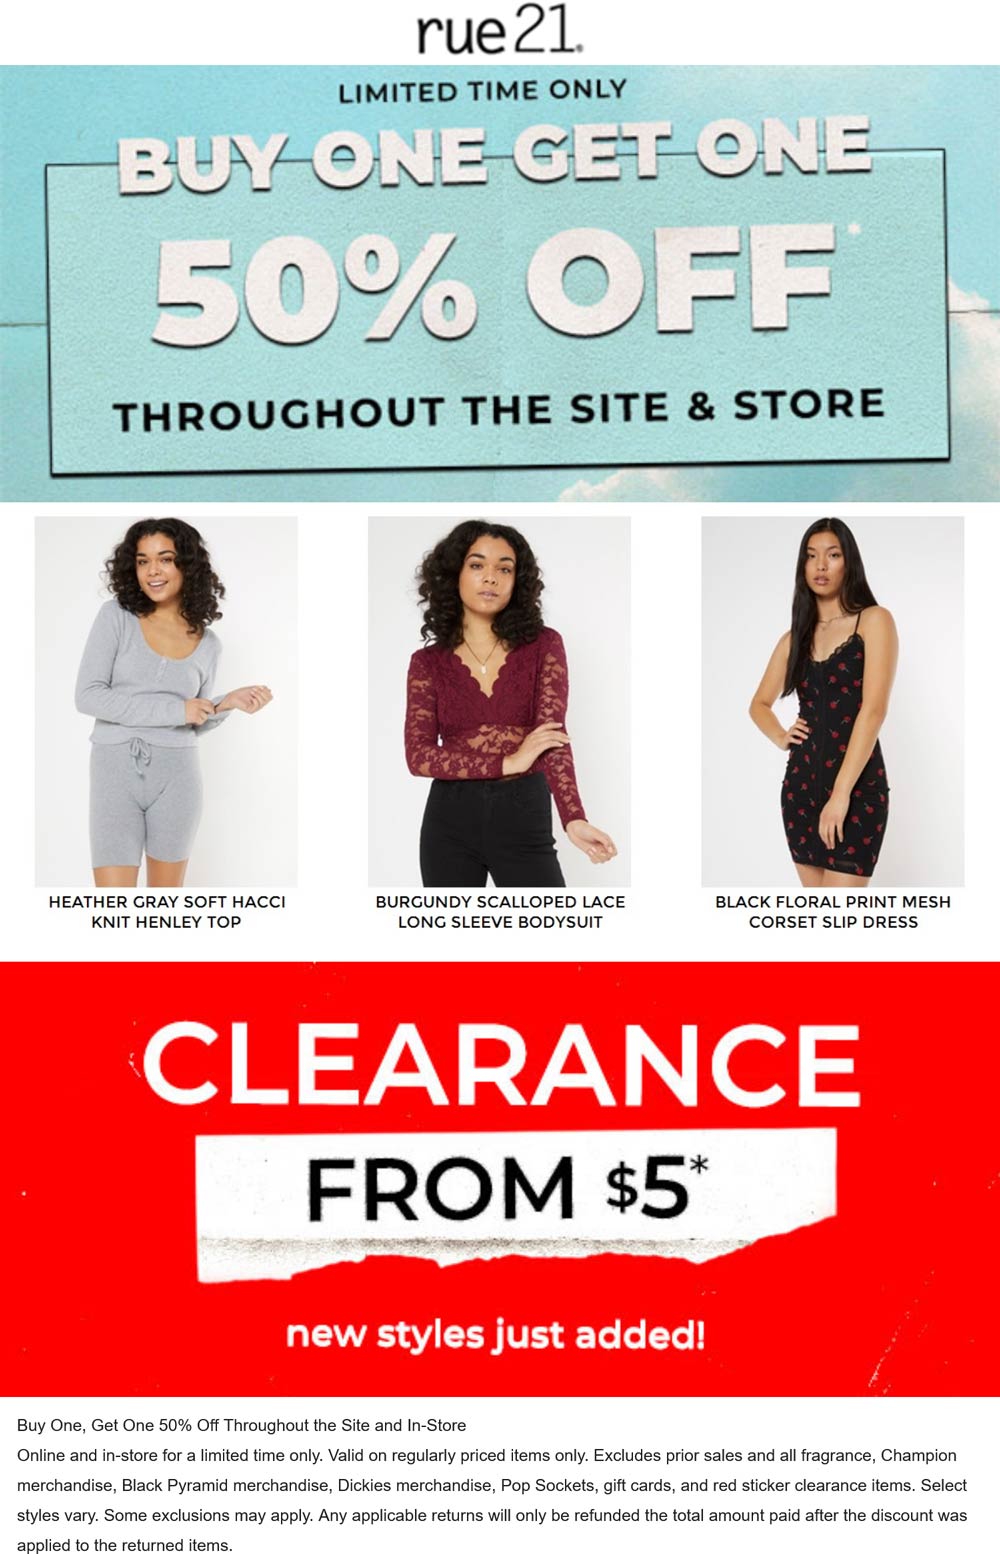 rue21 stores Coupon  Second item 50% off at rue21, ditto online #rue21 